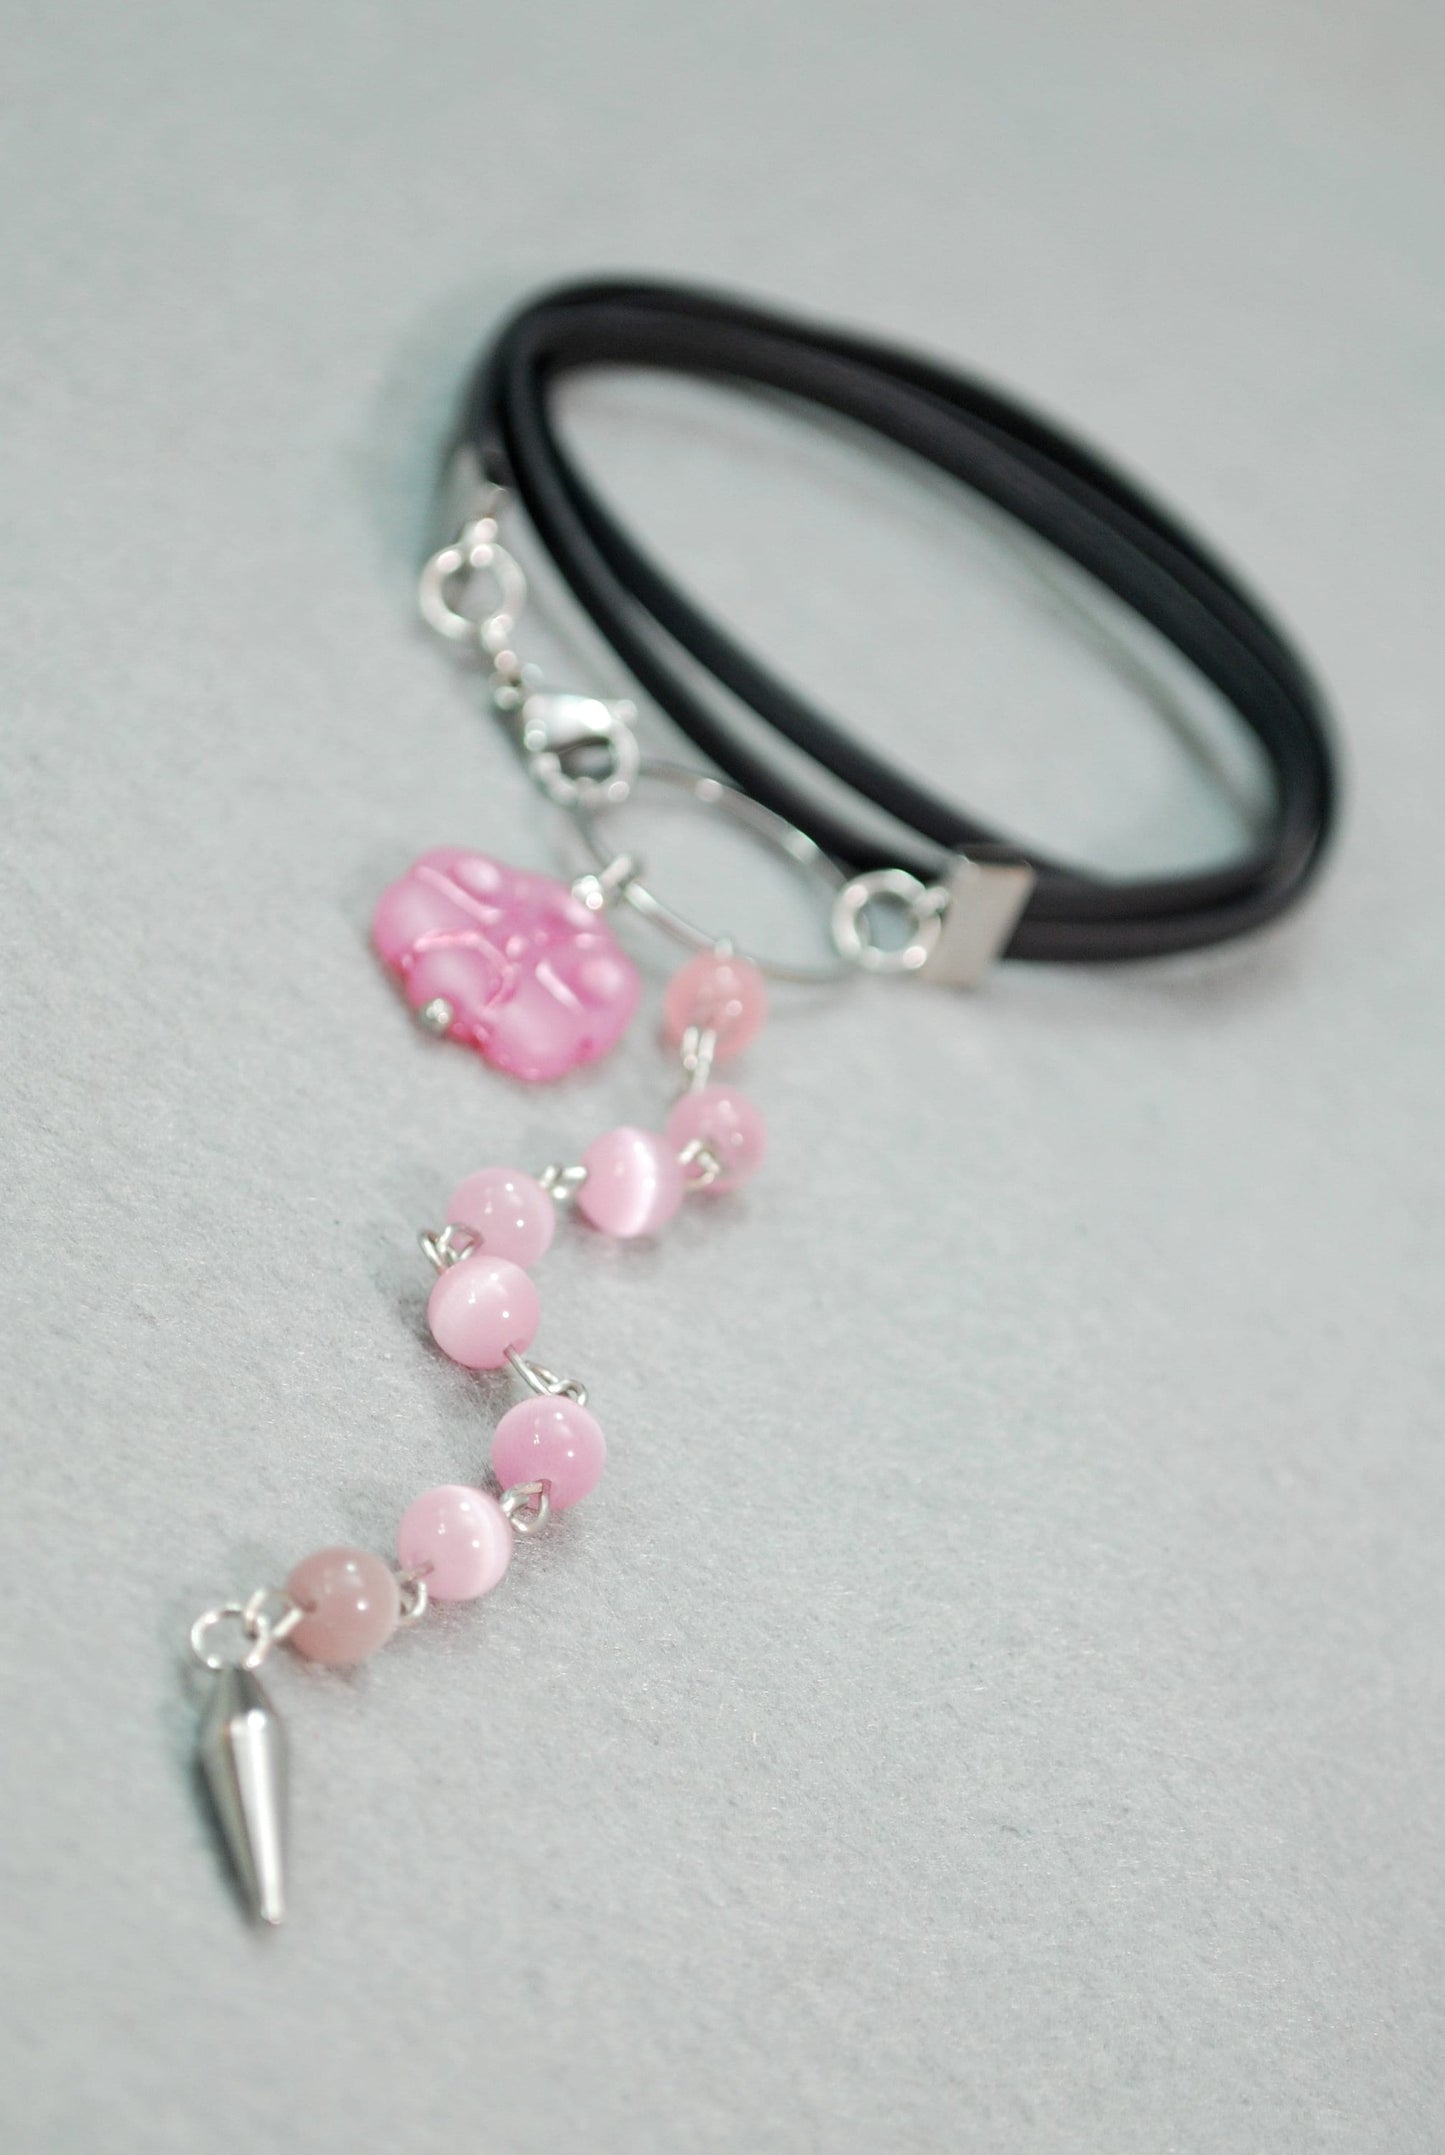 Leather Cord Choker with Rose Cat's Eye Stone Bead Cascade and Flower Czech Glass Bead - Estibela Design Collection